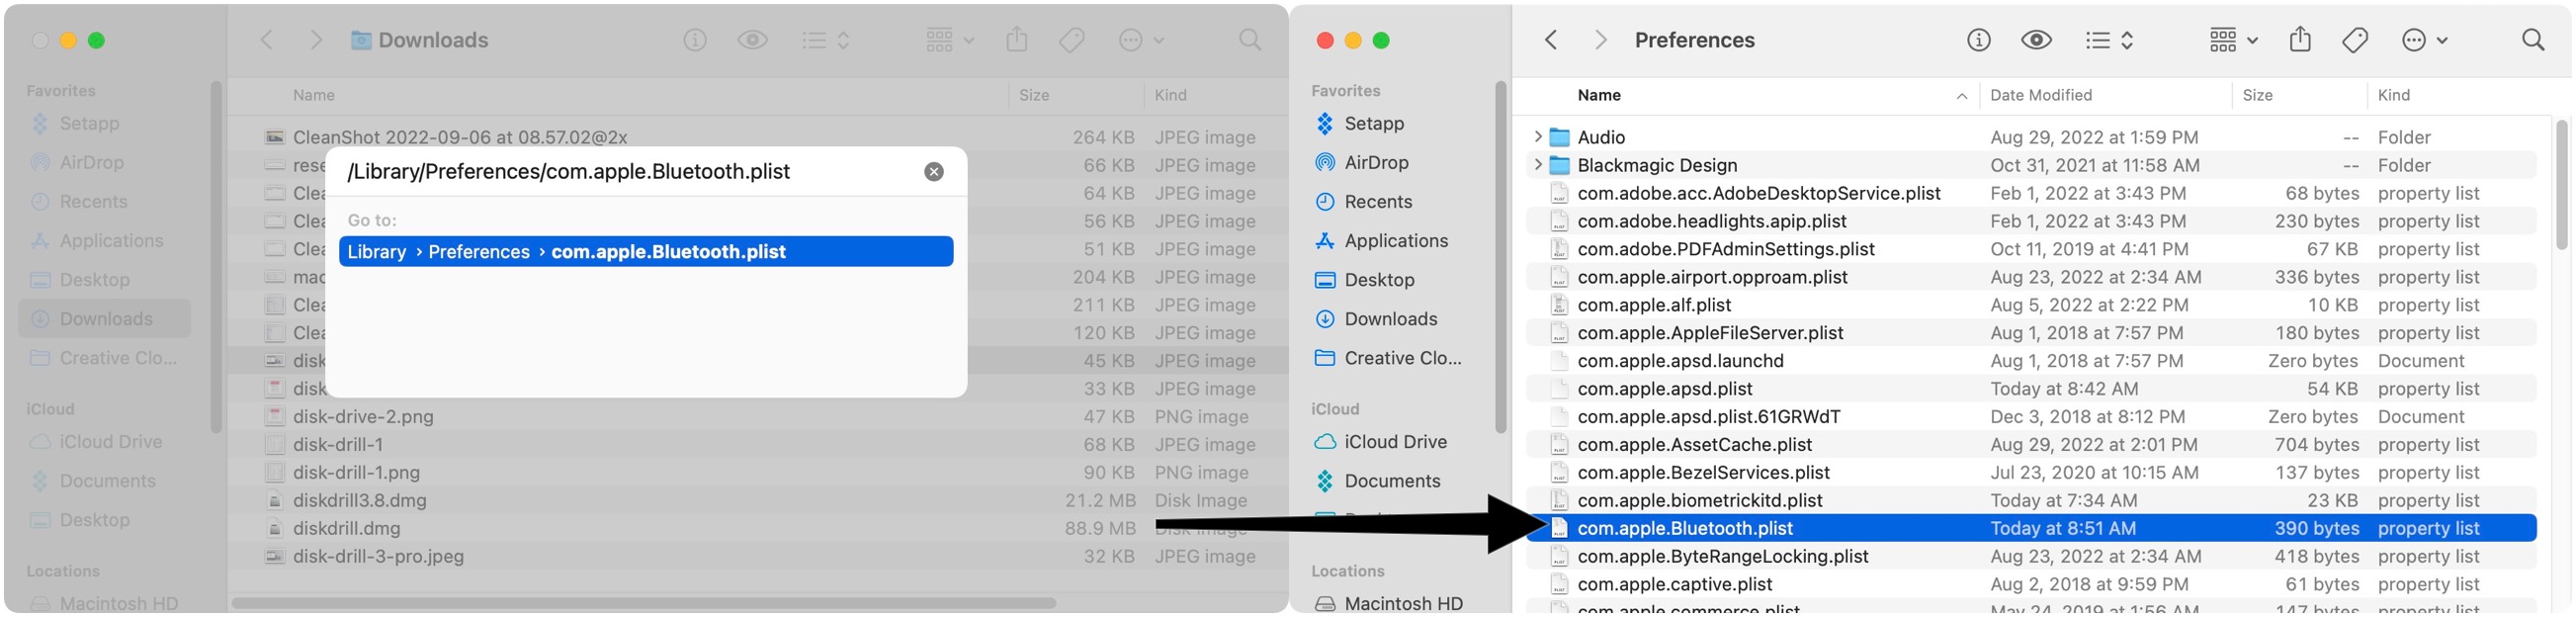 Another solution is to open Finder. Next, click in the menu bar Go > Go to Folder. From there, Type /Library/Preferences/com.apple.Bluetooth.plist. Press Return. Once you do, you'll see the necessary file highlighted.